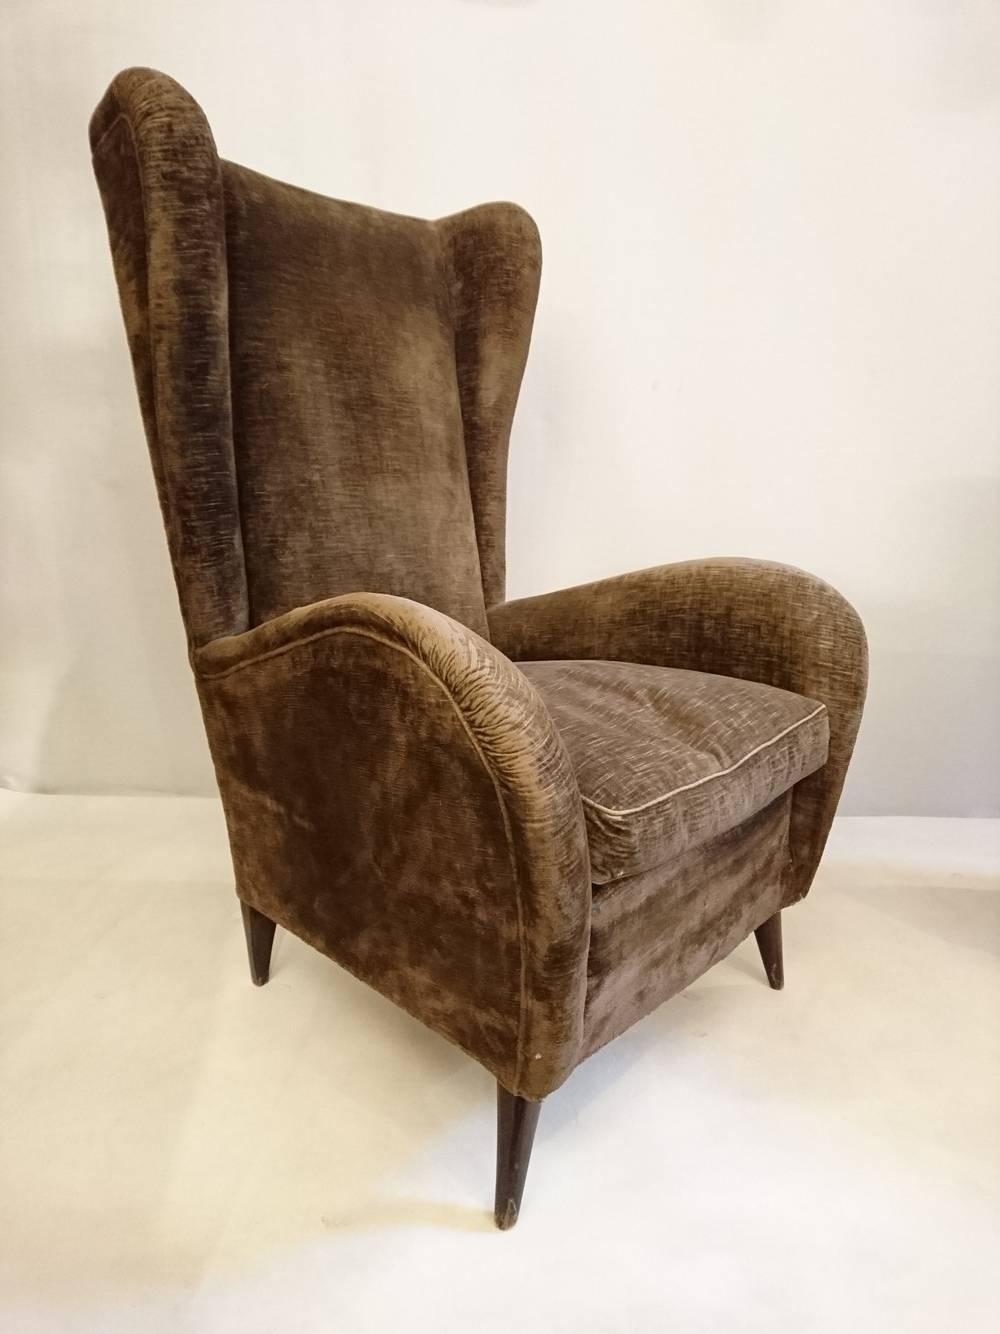 Wingback armchairs in the original fabric in the manner of Gio Ponti. These chairs will need reupholstery work. 